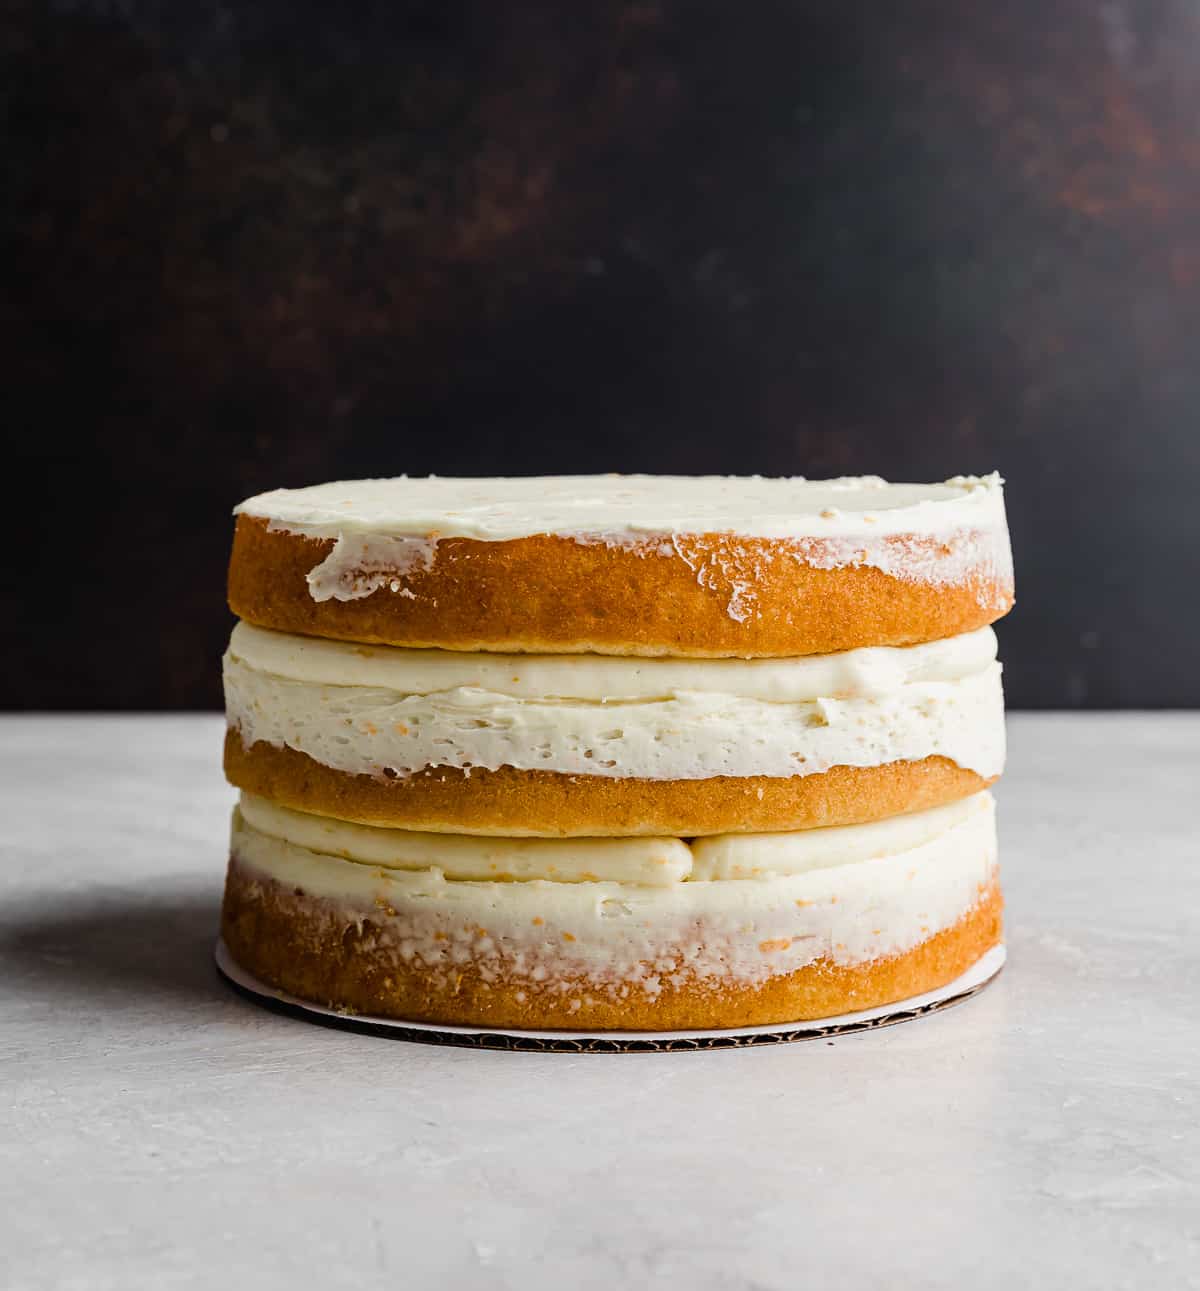 A three layered naked cake against a brown background.